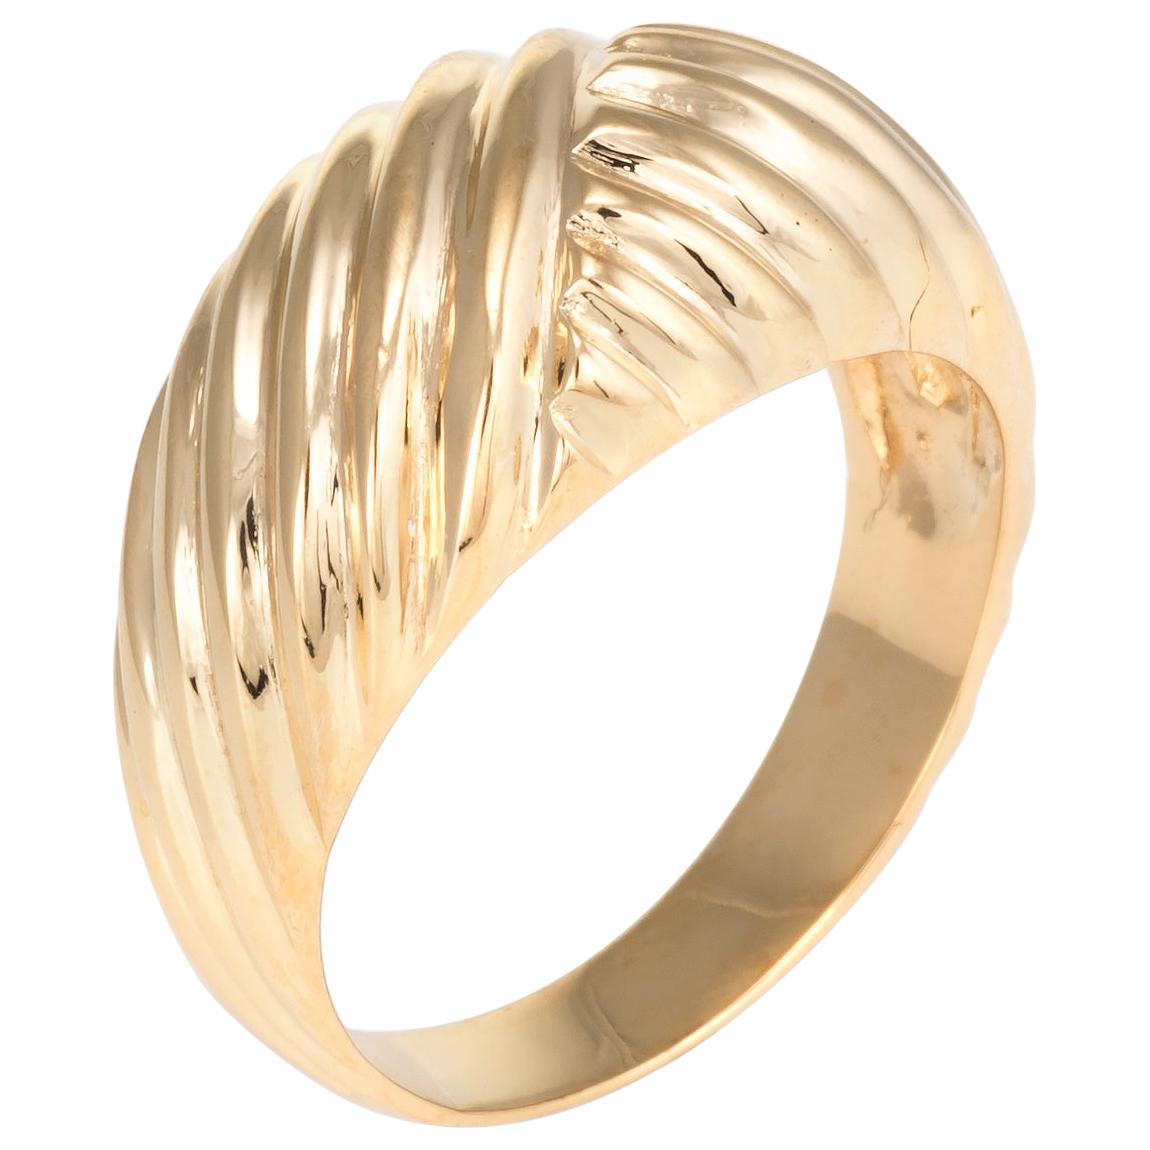 Modern Contemporary Rings Glamorous Ribbed Dome Ring in 10k Yellow Gold 